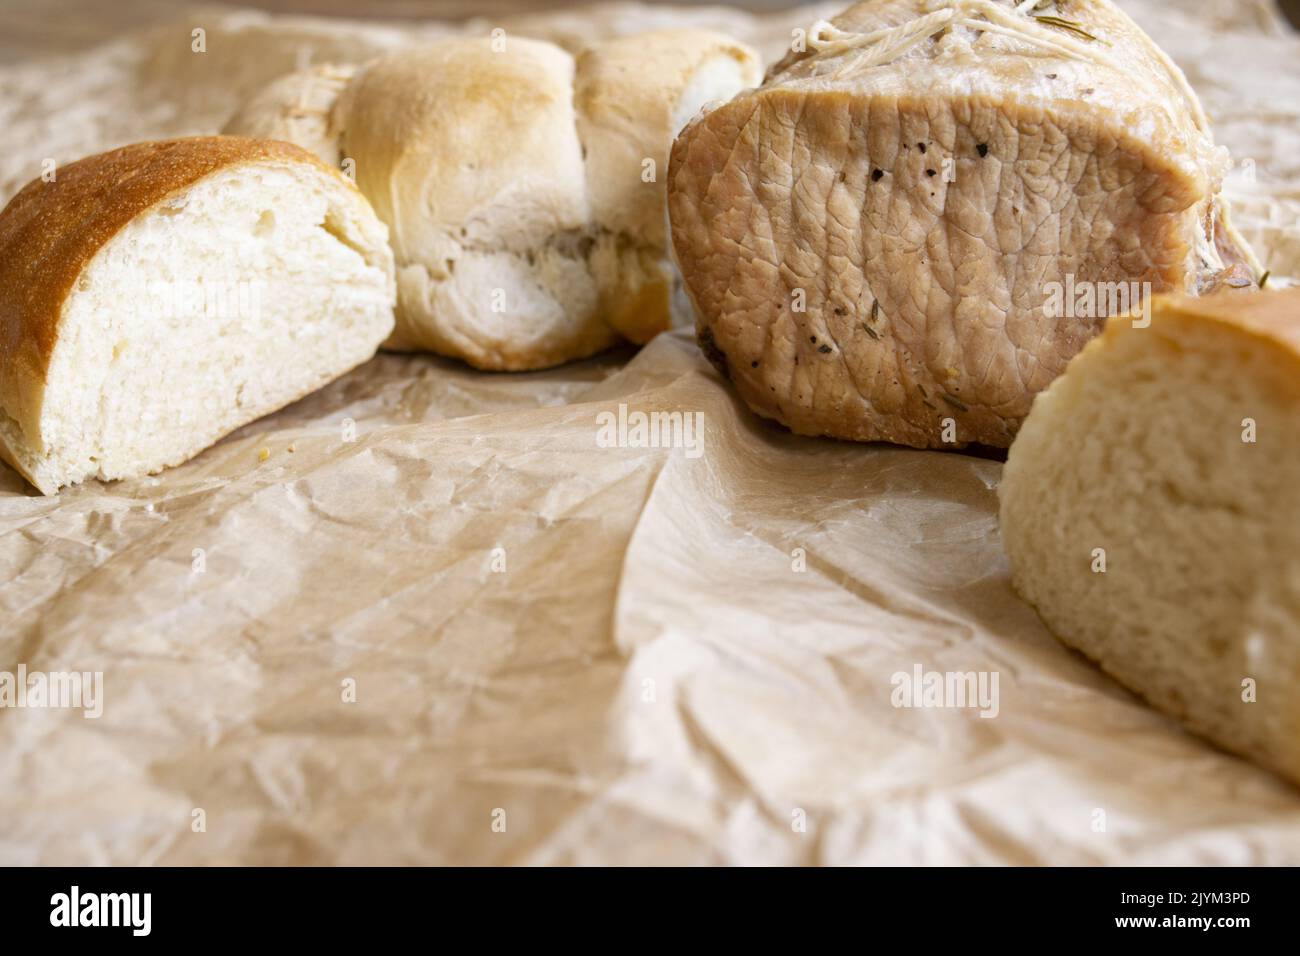 pork loin accompanied by slices of bread Stock Photo